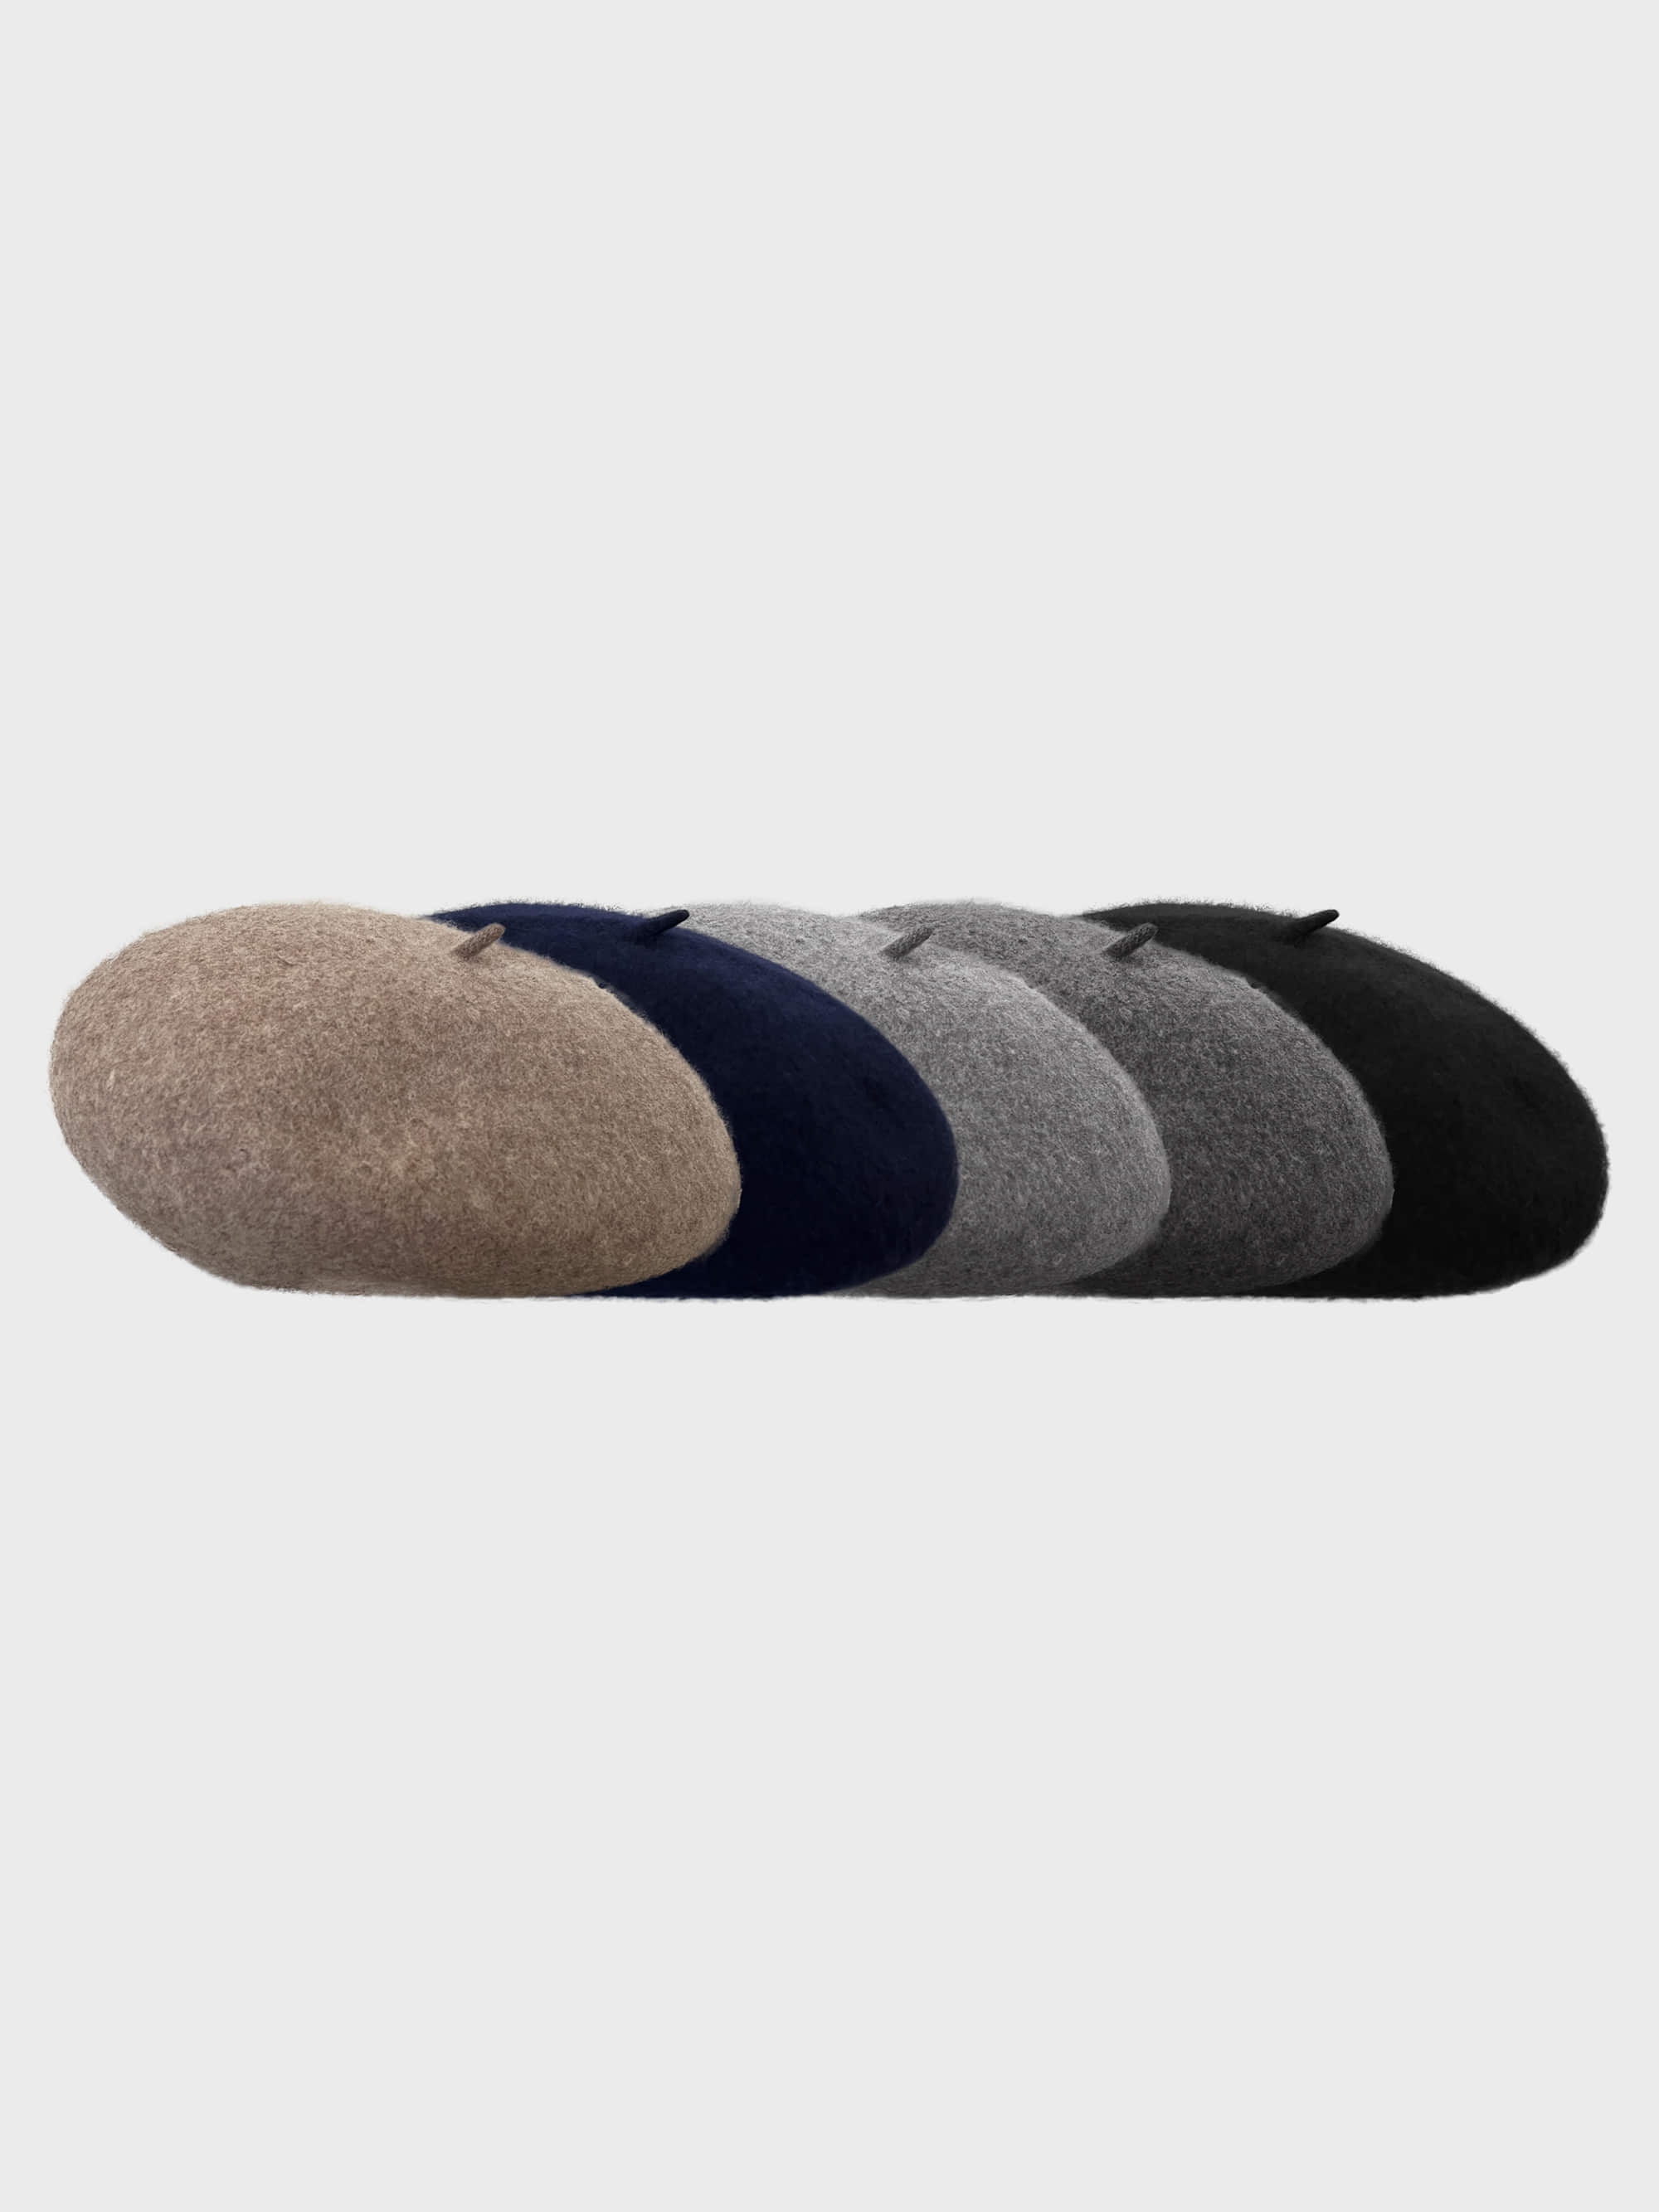 [Wool] Wipy beret (5color)